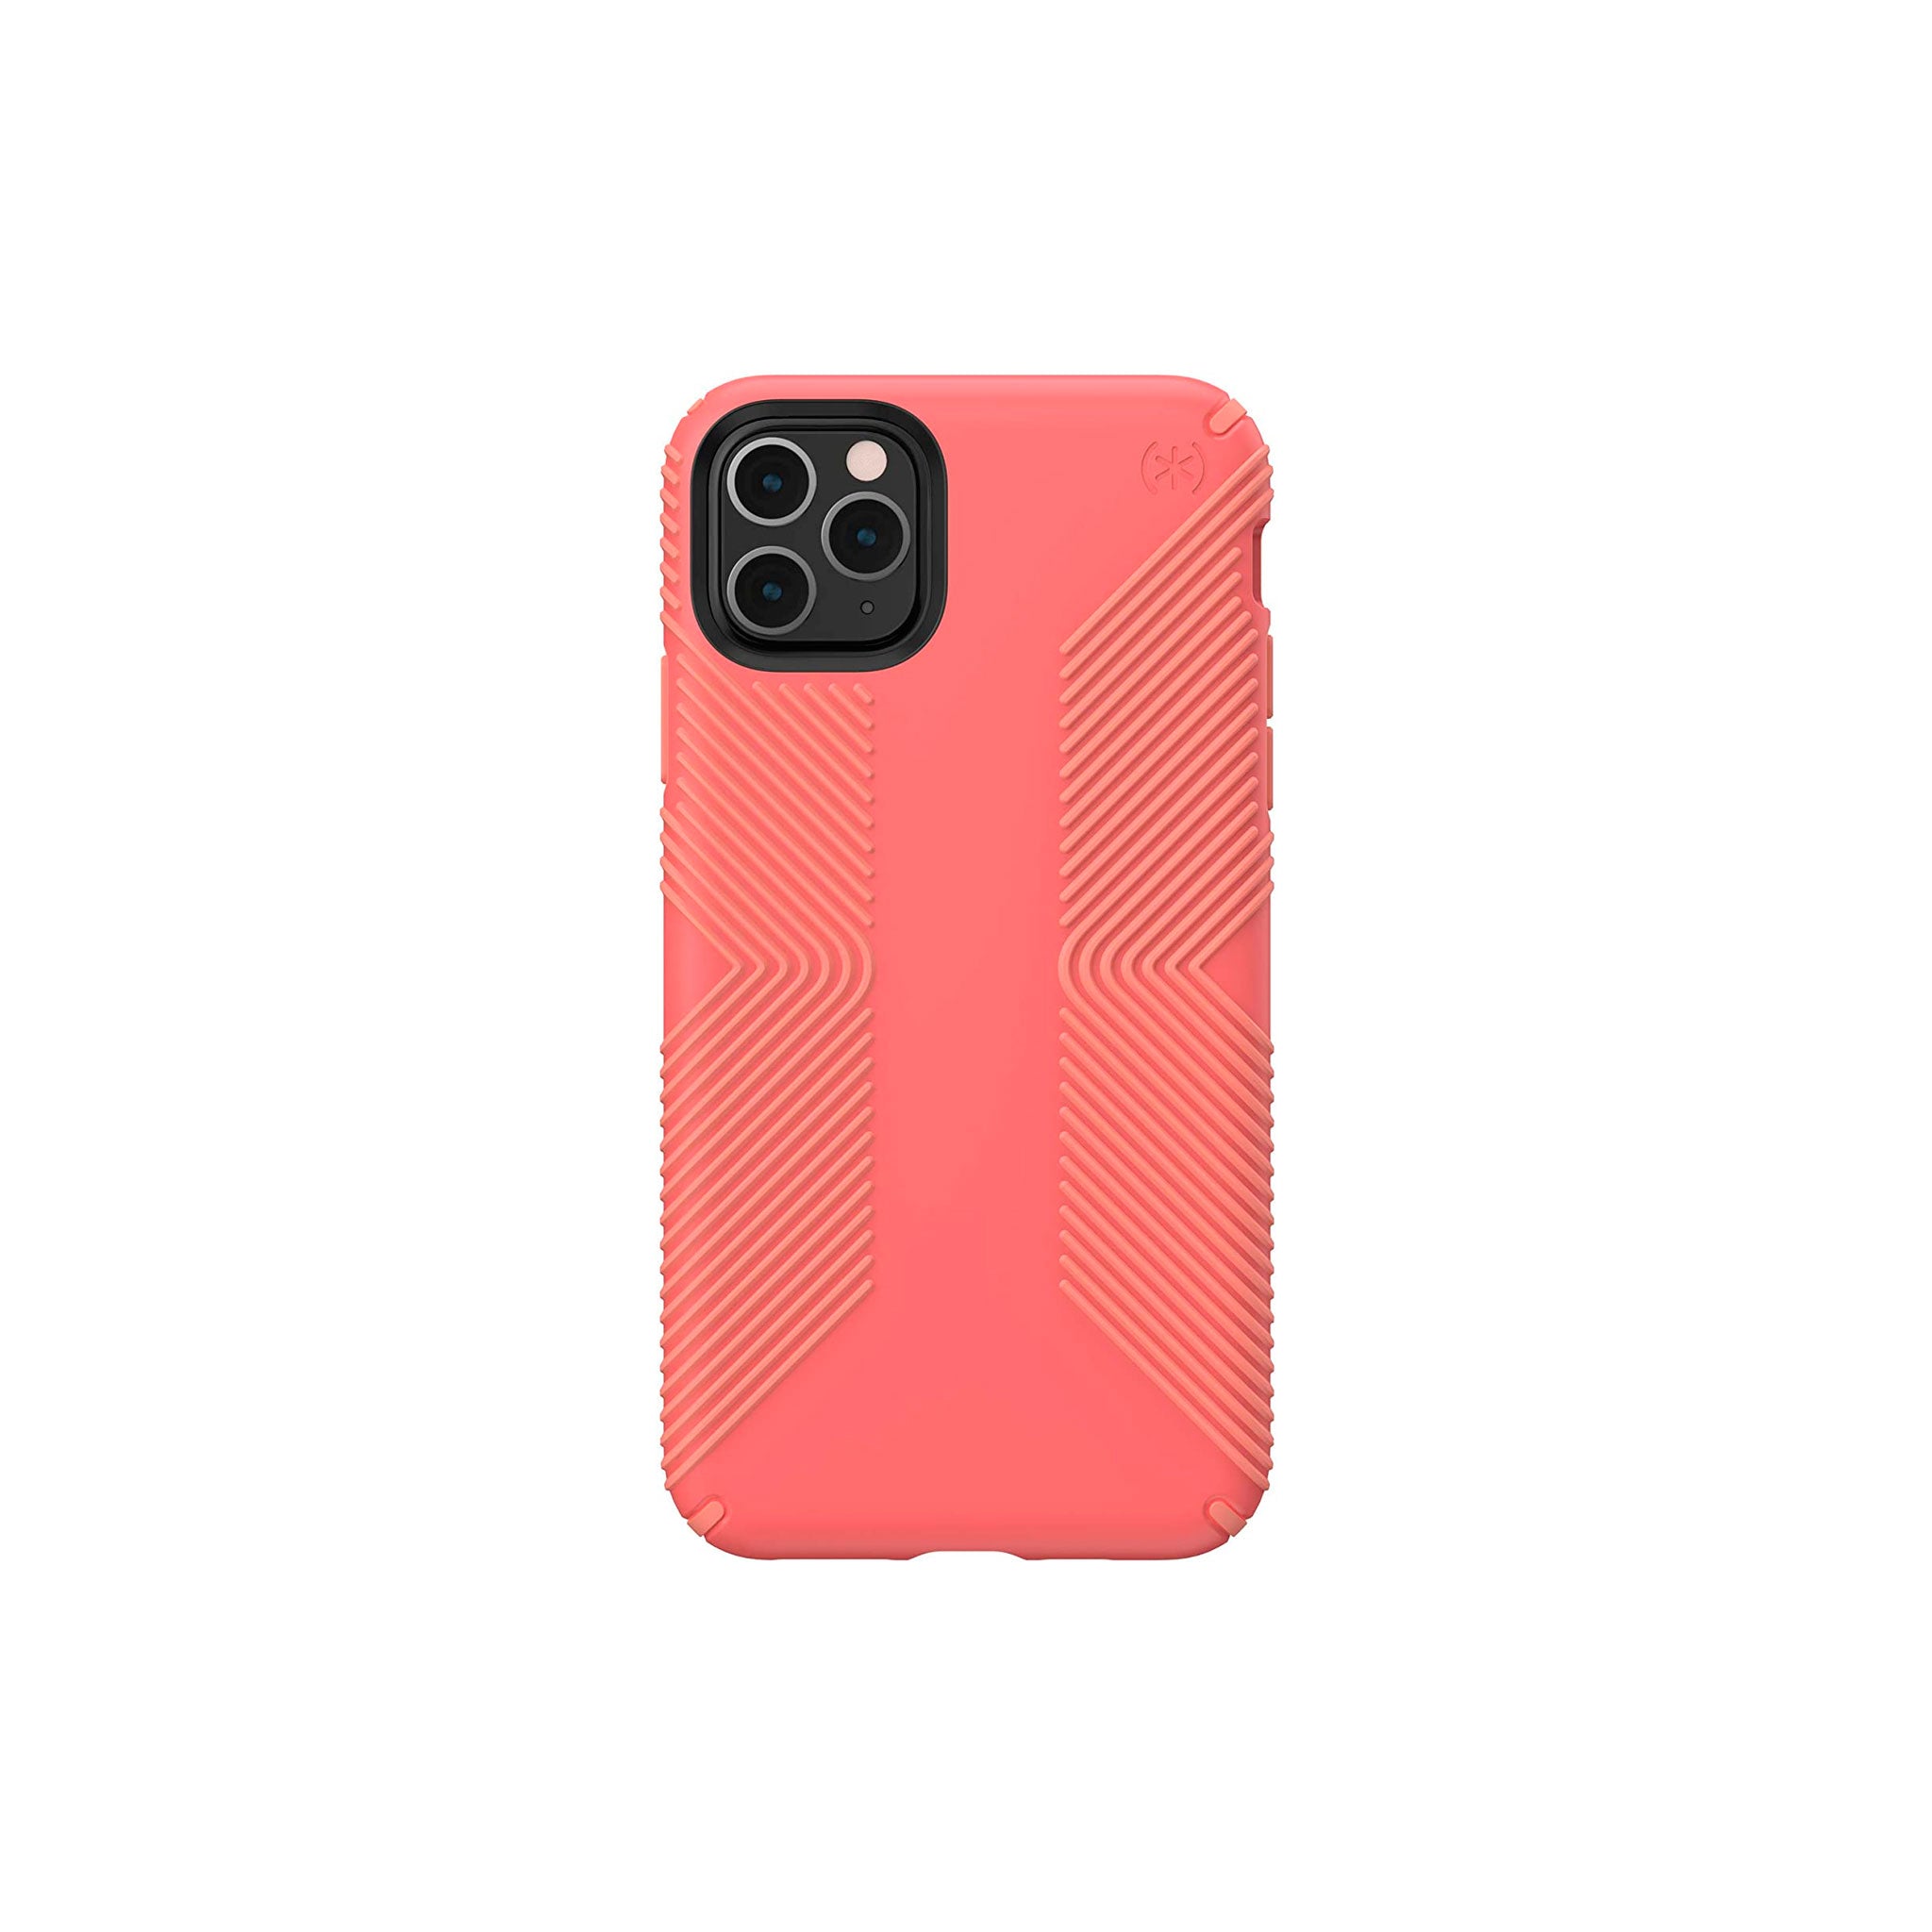 Speck - Presidio Grip Case For Apple Iphone 11 Pro Max - Parrot Pink And Papaya Pink